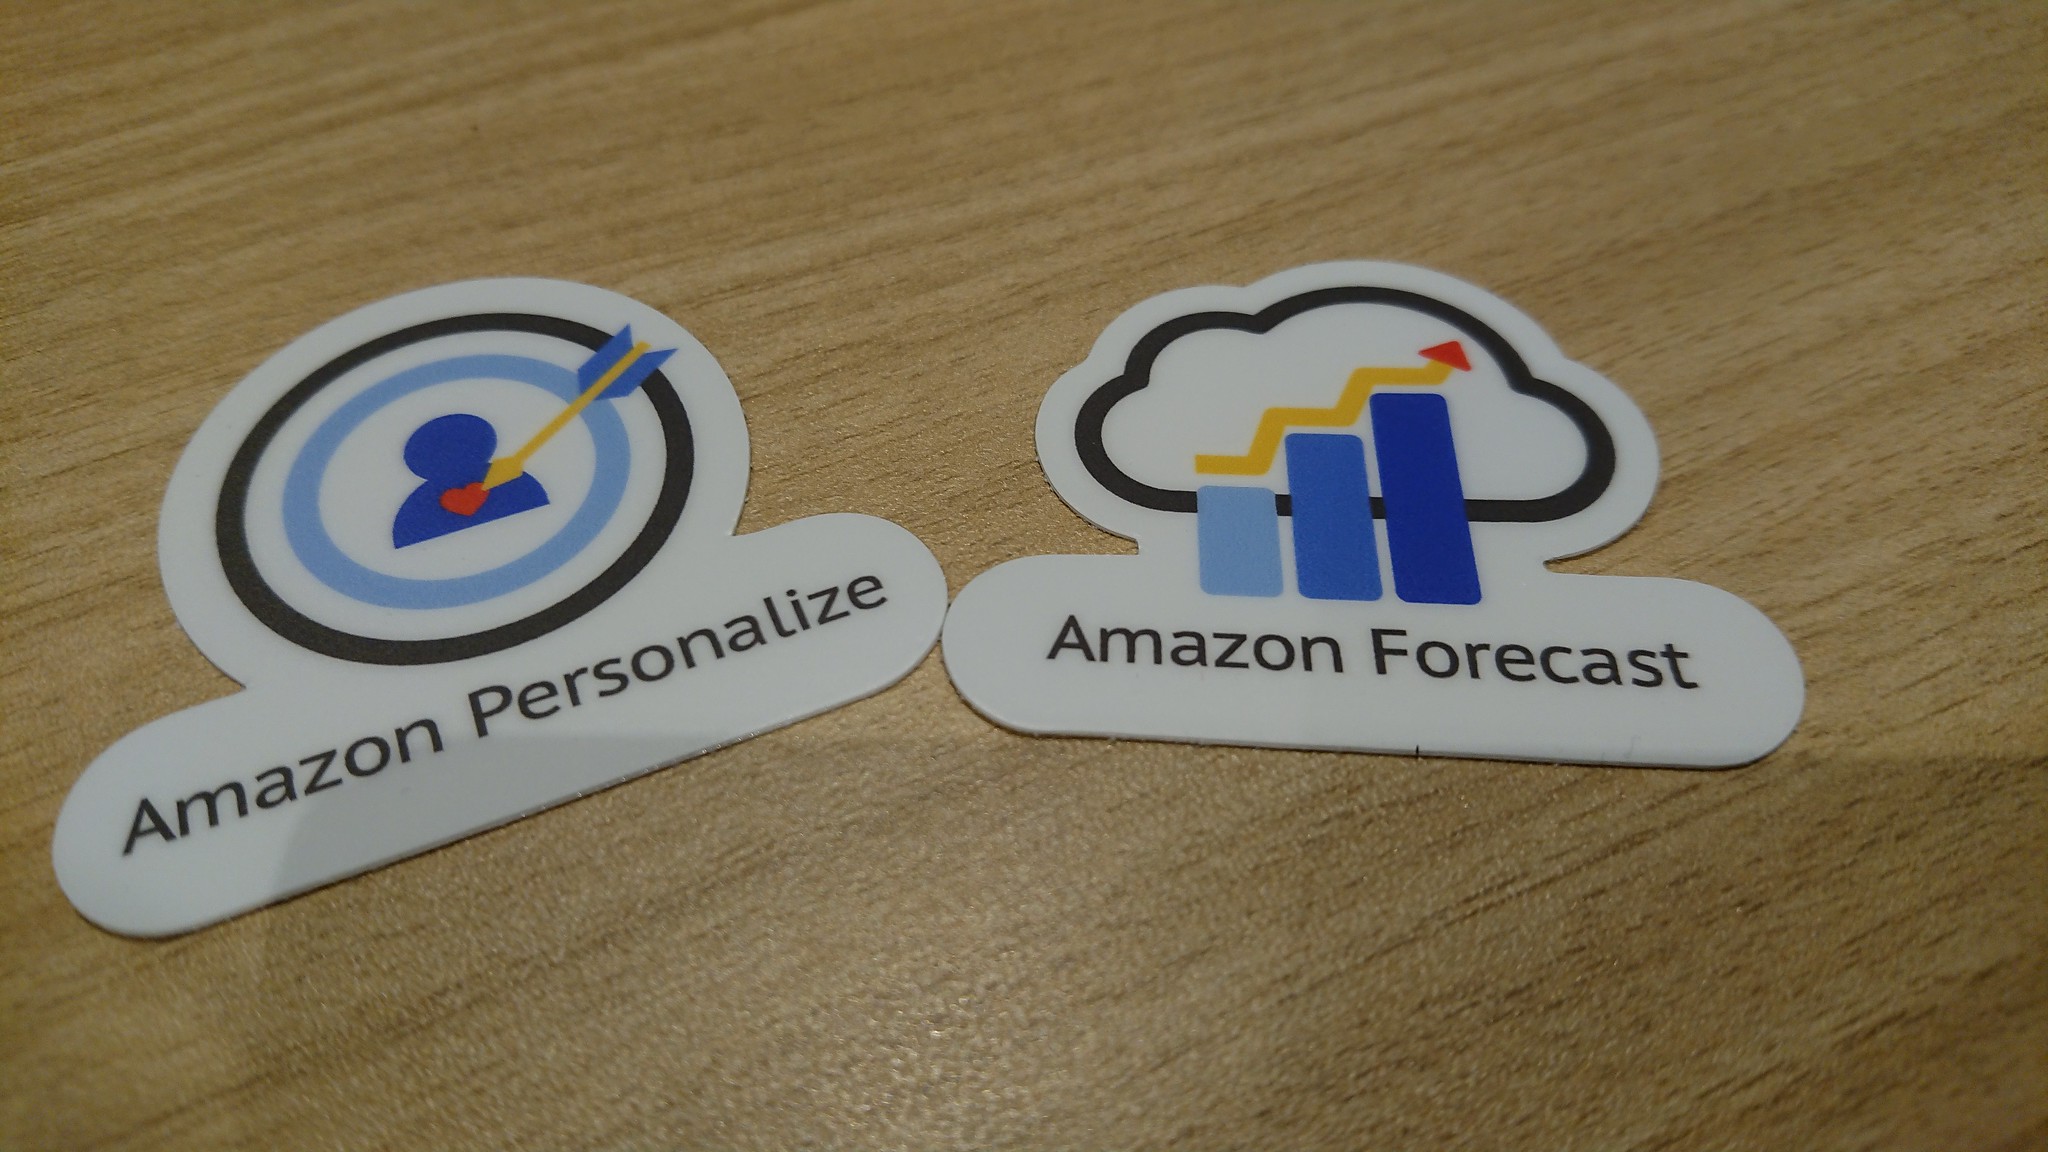 Aws Forecast and Personalize seminer